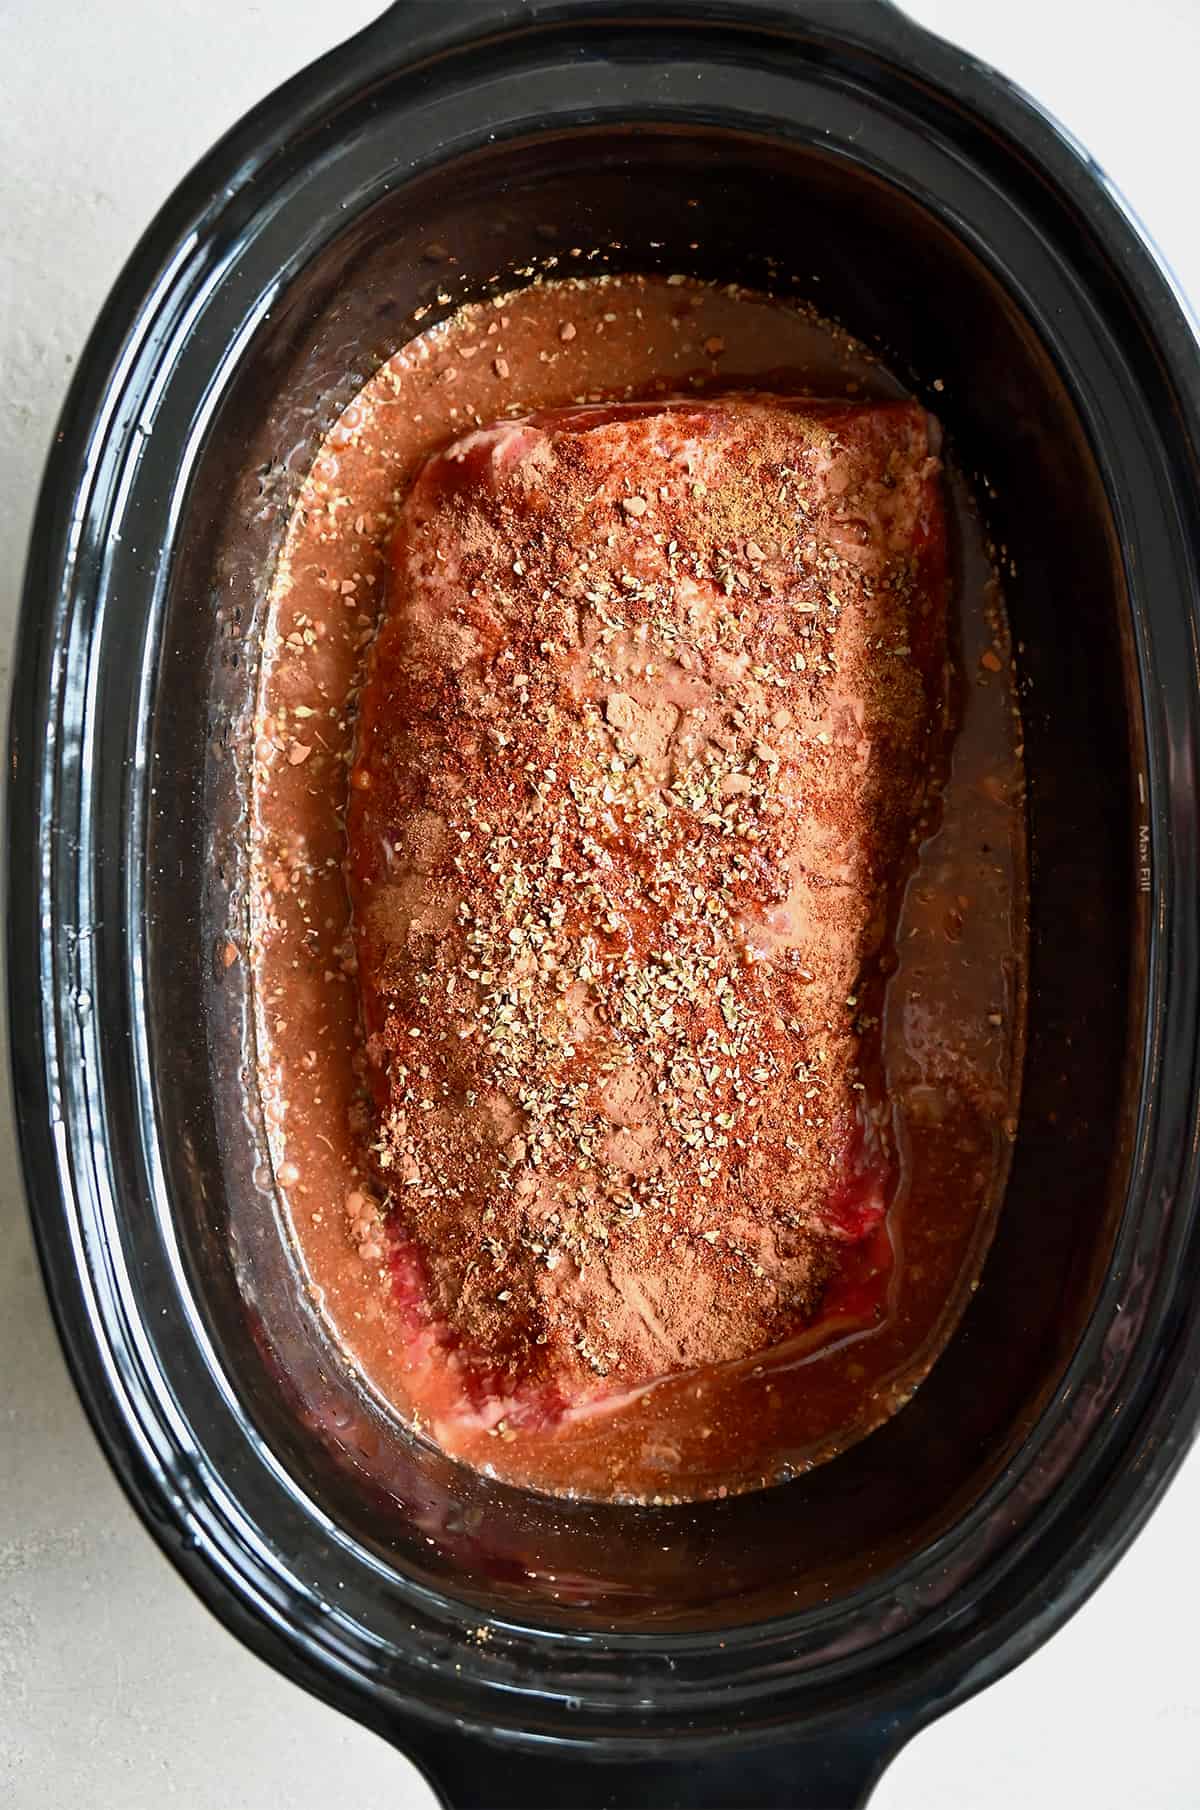 An uncooked pork roast seasoned with spices in the bowl of a slow cooker.